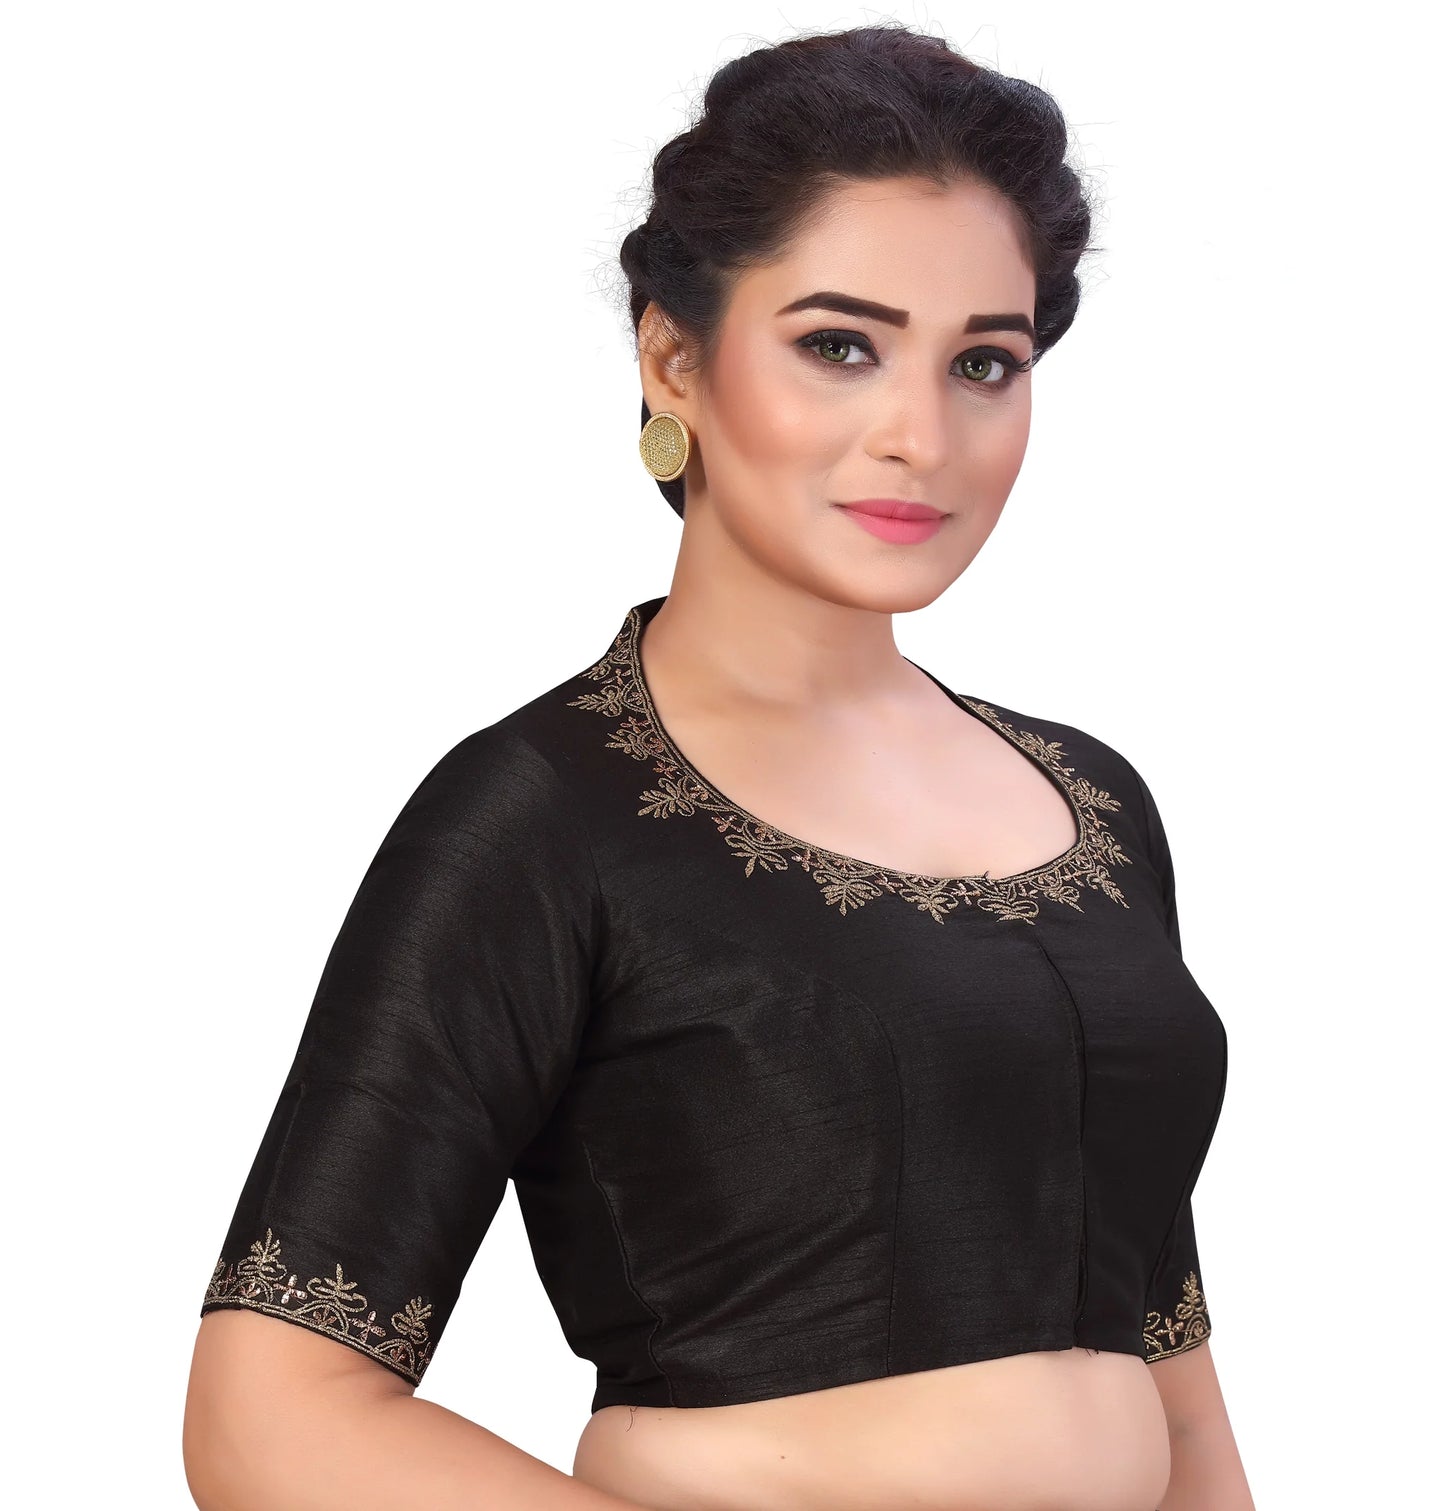 Embroidered Saree Blouse with Matka Neckline - Black